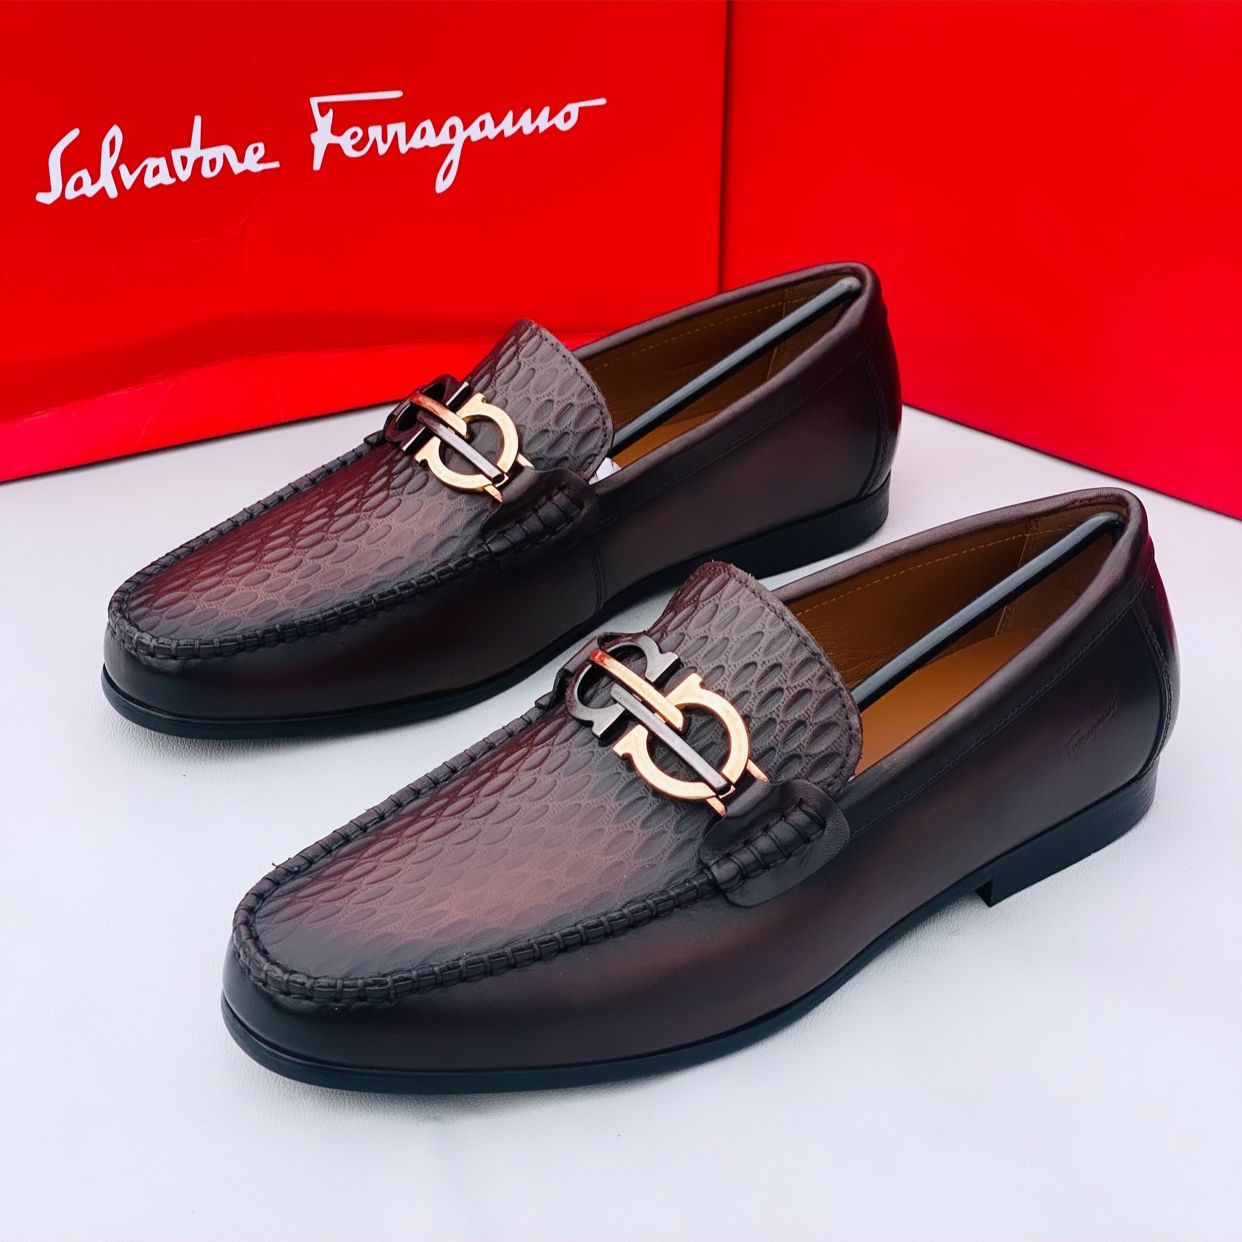 Salvatore Ferragamo Executive Brown Loafer | Buy Online At The Best ...